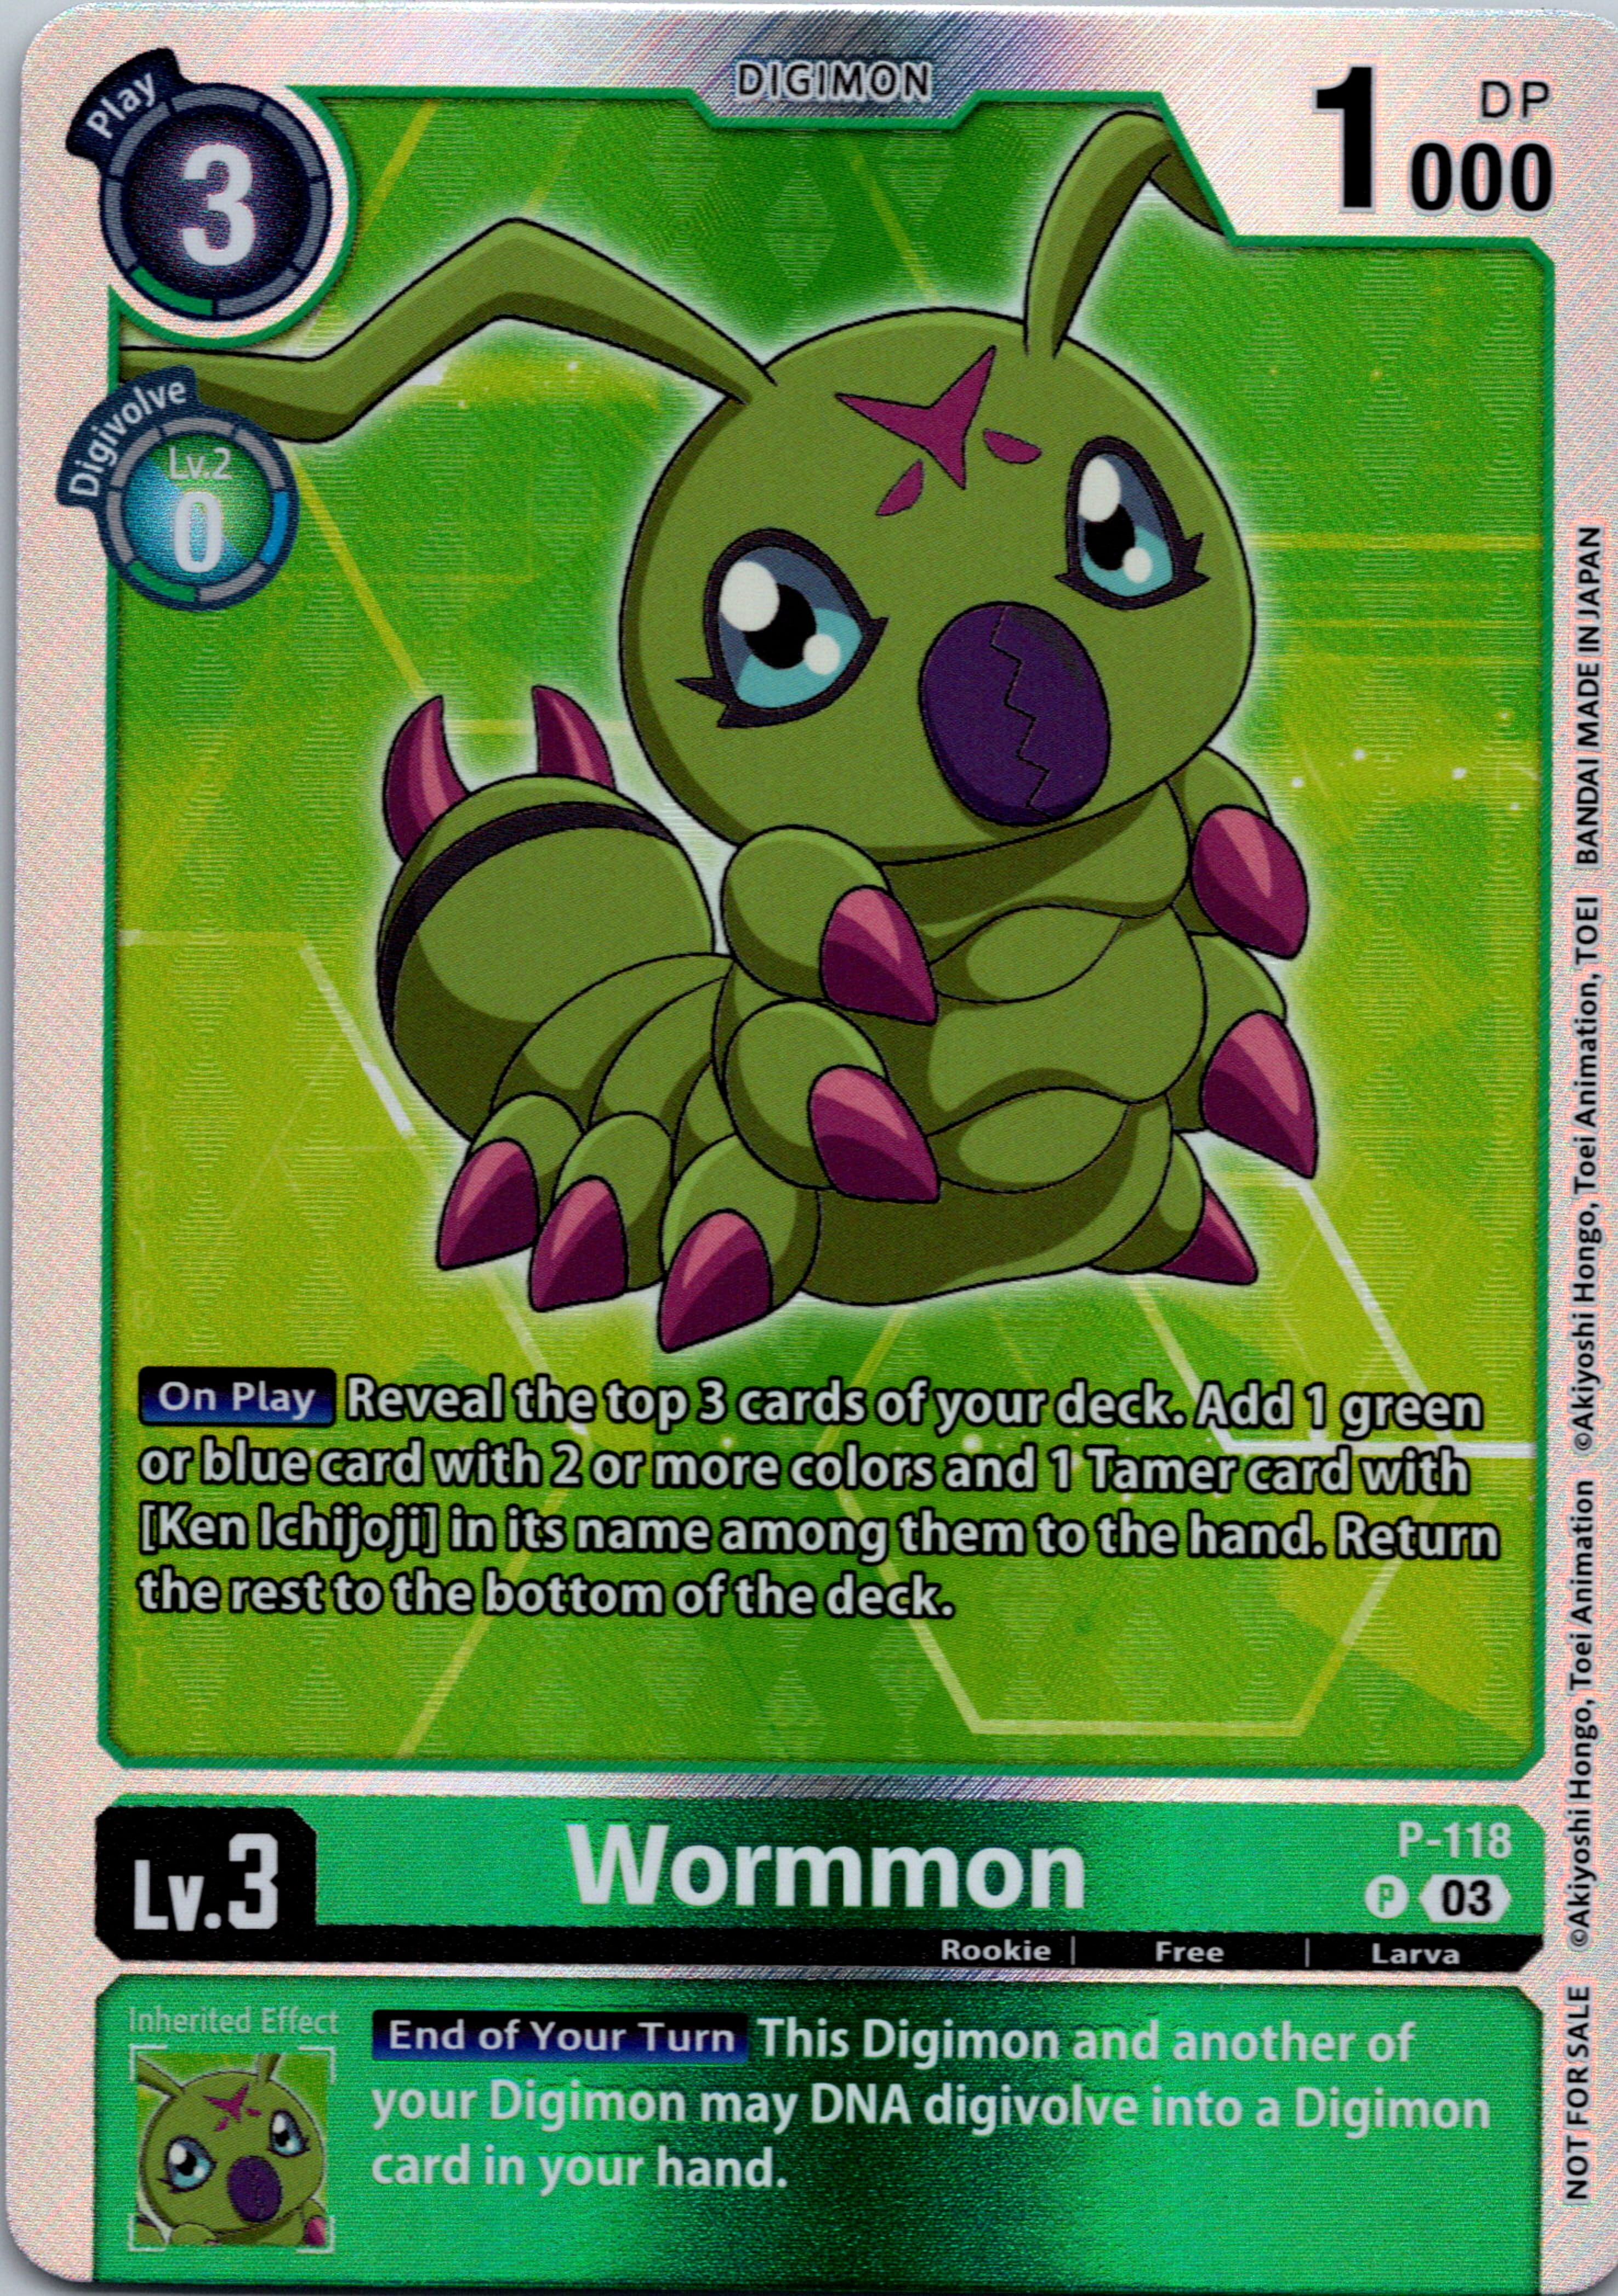 Wormmon - P-118 (Tamer Party Pack -The Beginning- Ver. 2.0) [P-118] [Digimon Promotion Cards] Foil